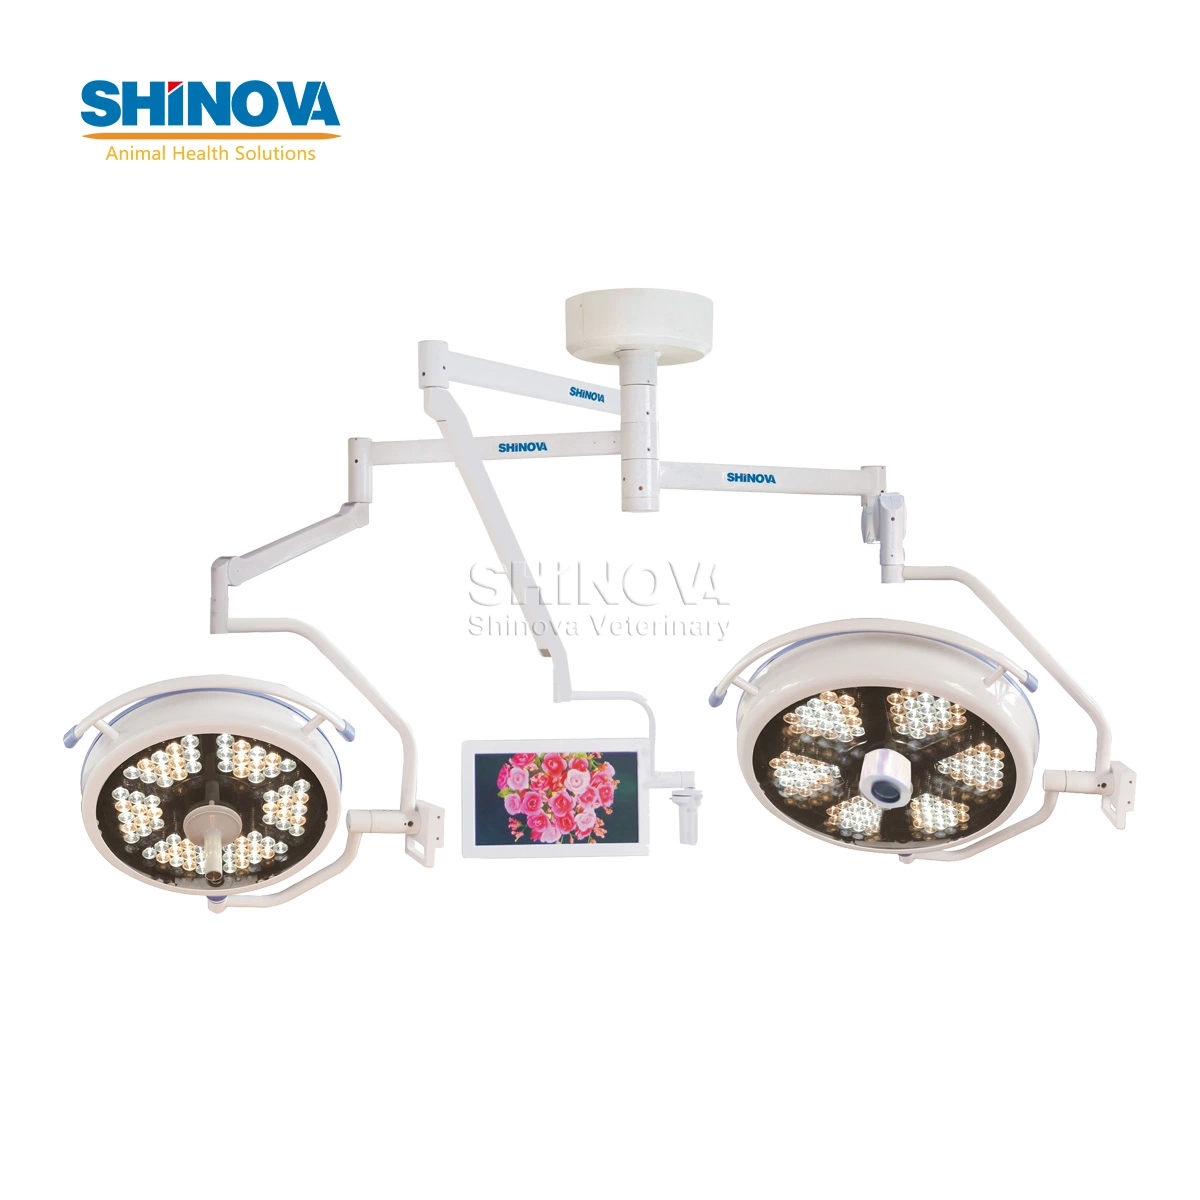 Factory Price Medical LED Operation Light Shadowless Lamp Double Head Surgical Operating Lamp with TV